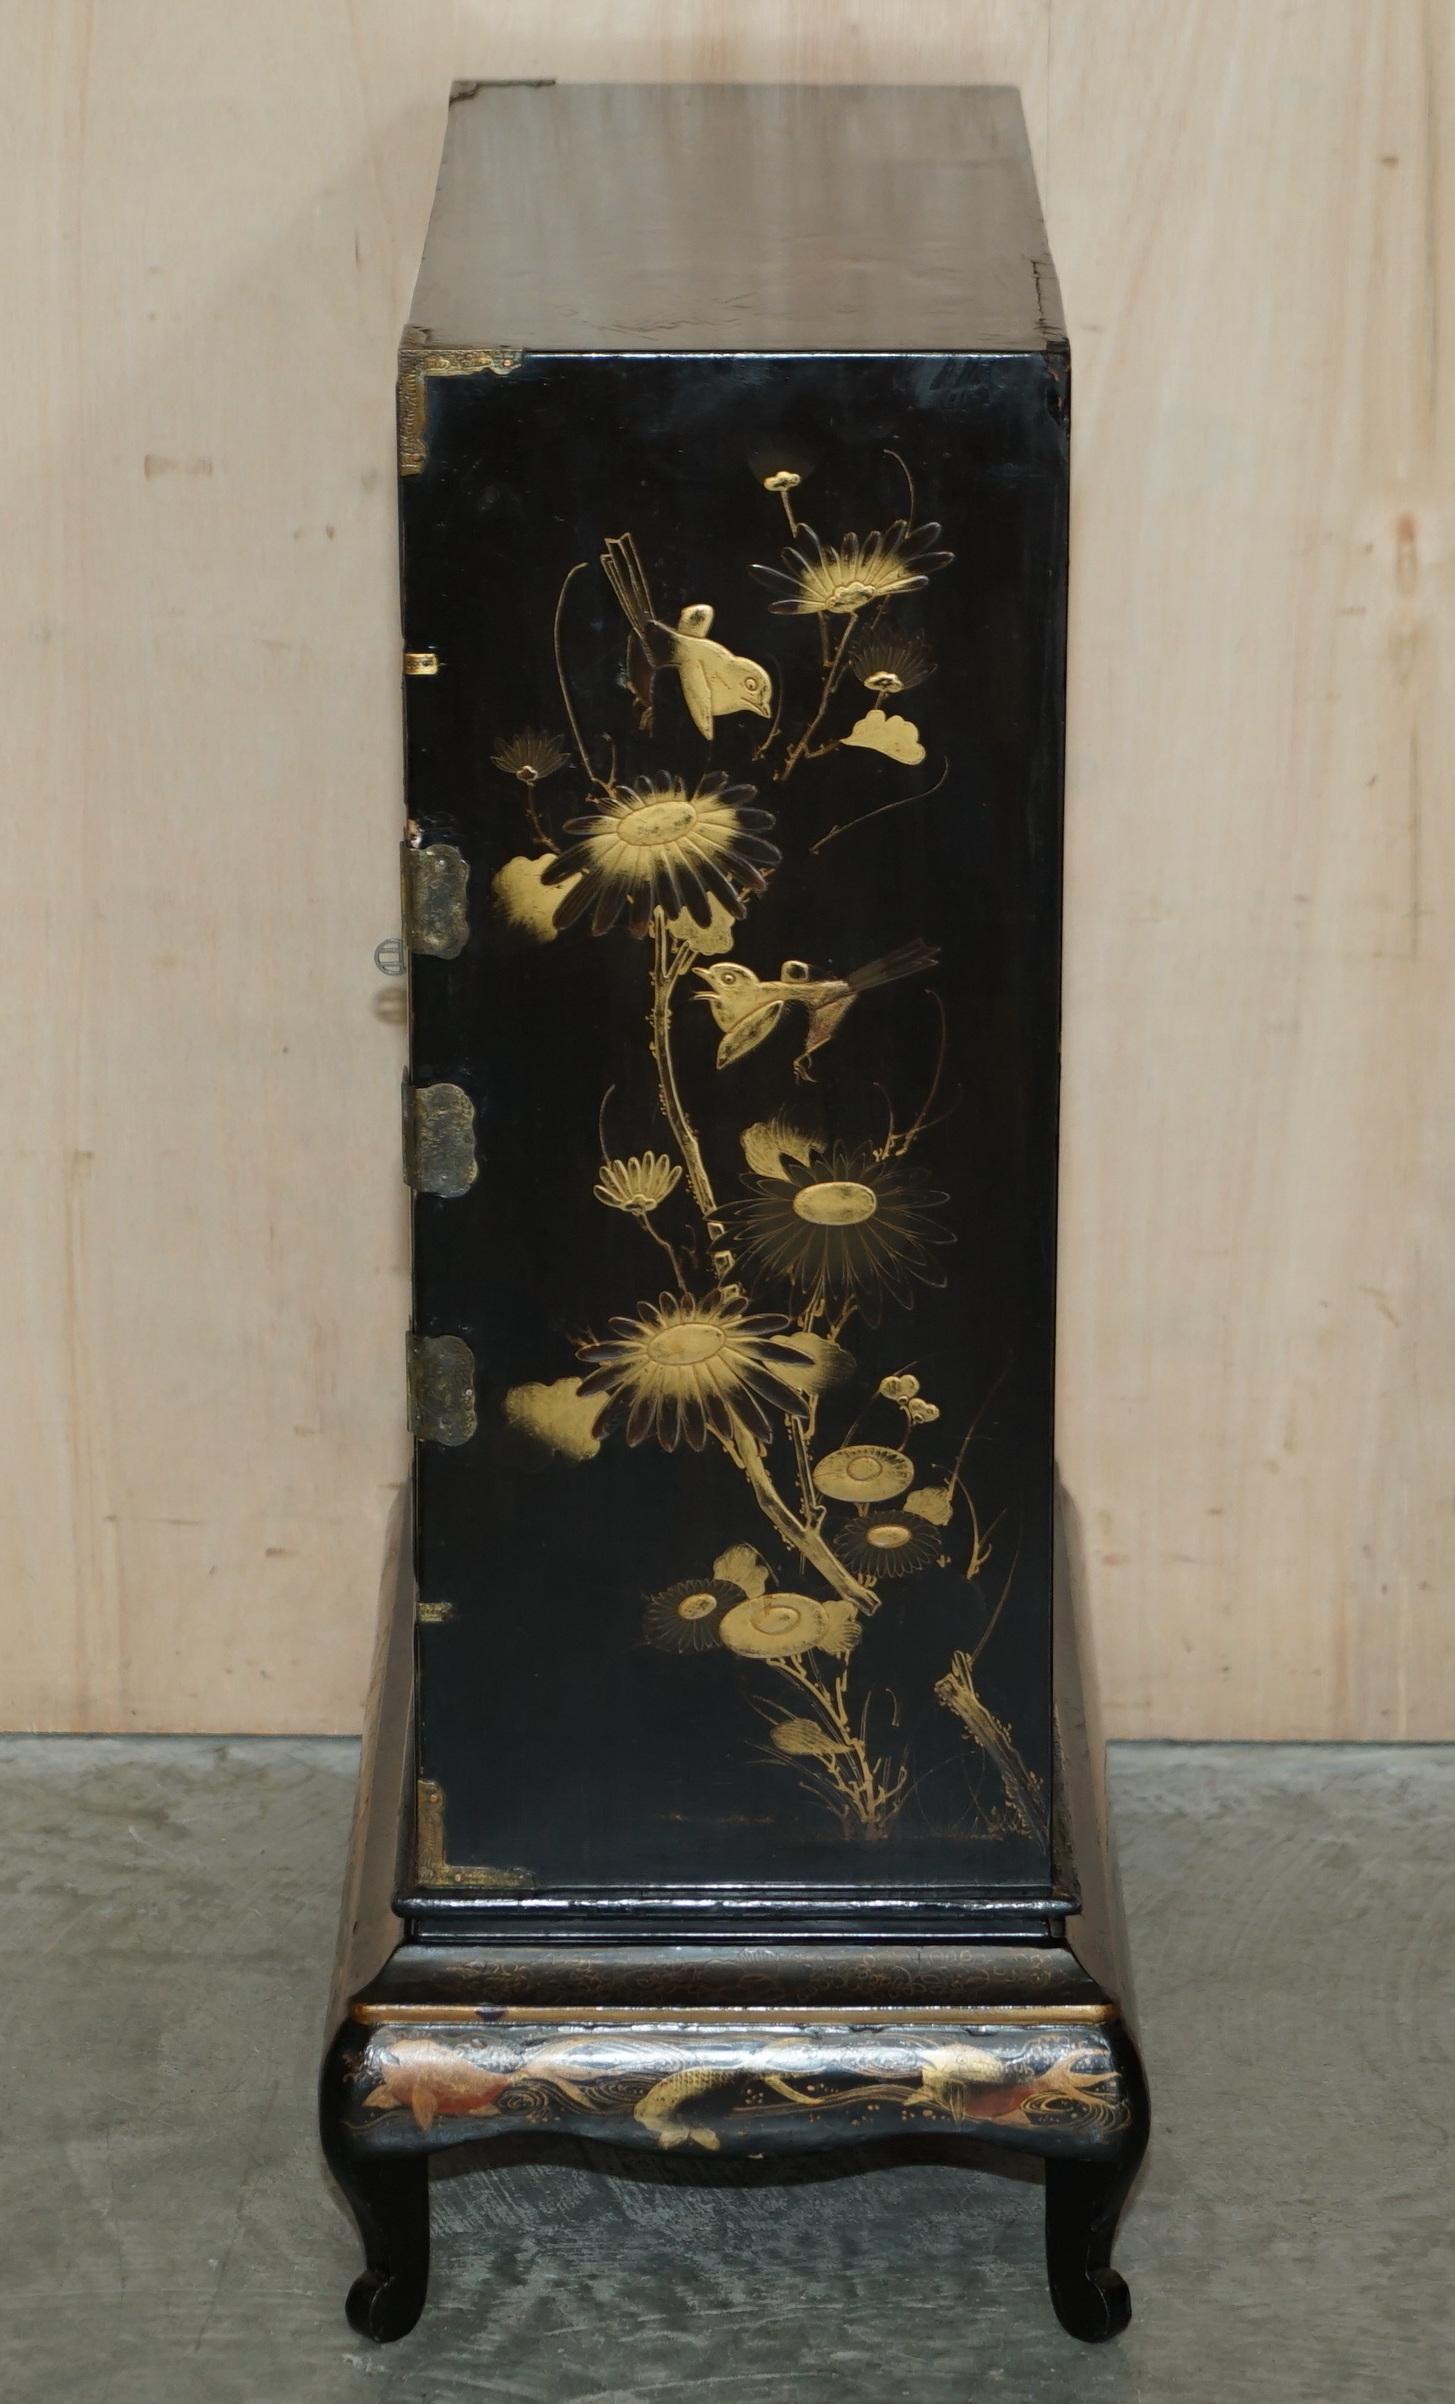 Rare Oriental Chinese Export Antique Cabinet Lots of Drawers for Fine Teas 9